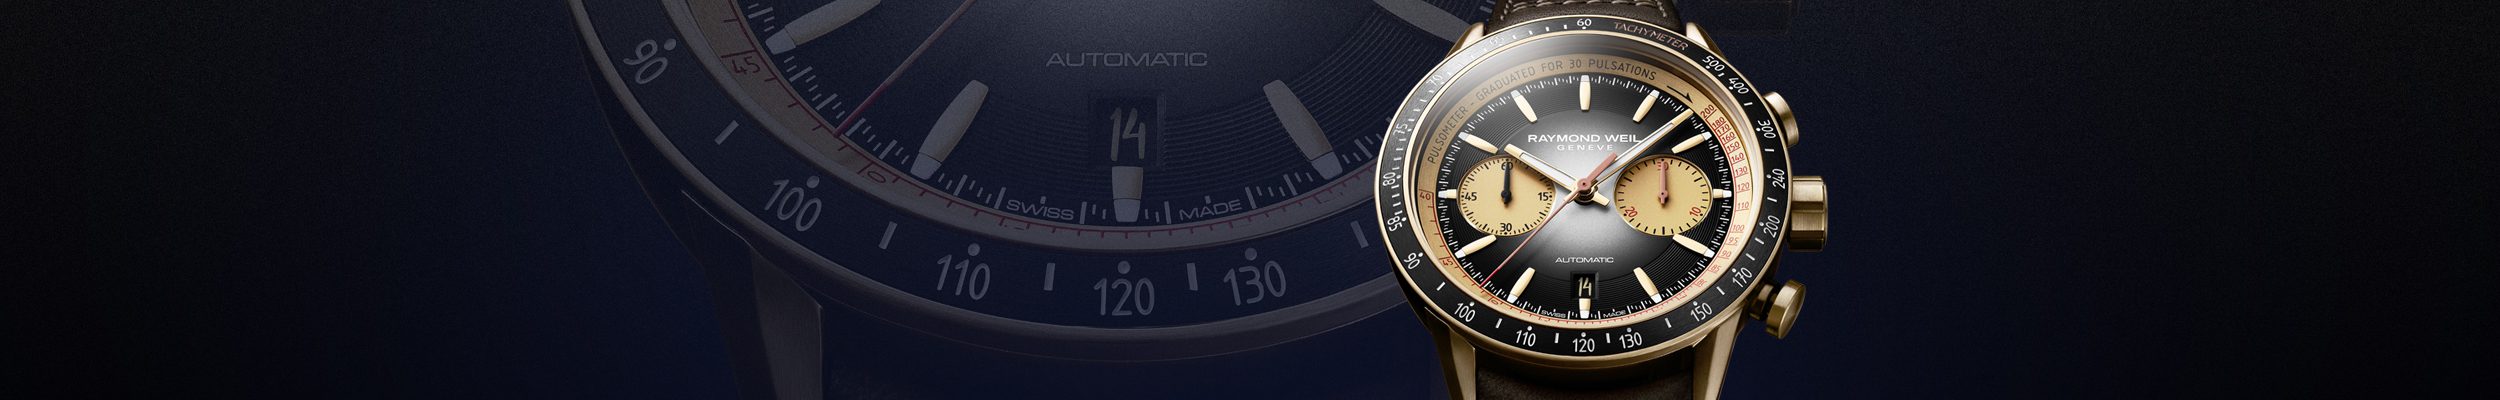 Banner image for Chronograph Watches page